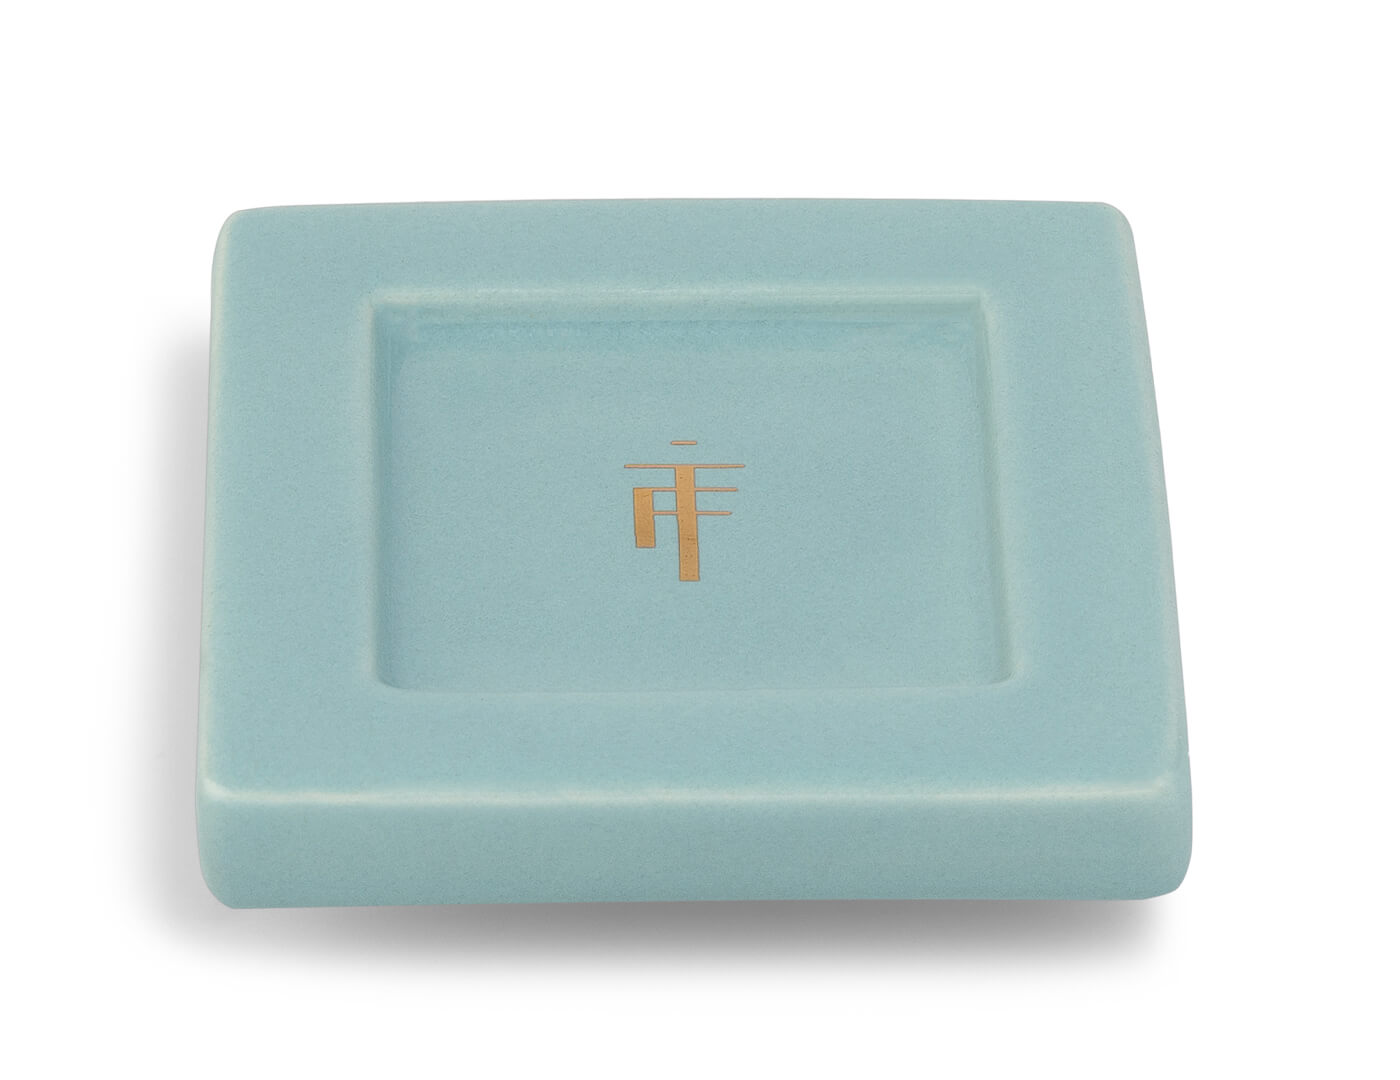 Wellbeing Gift Set ceramic Tea Tray in blue